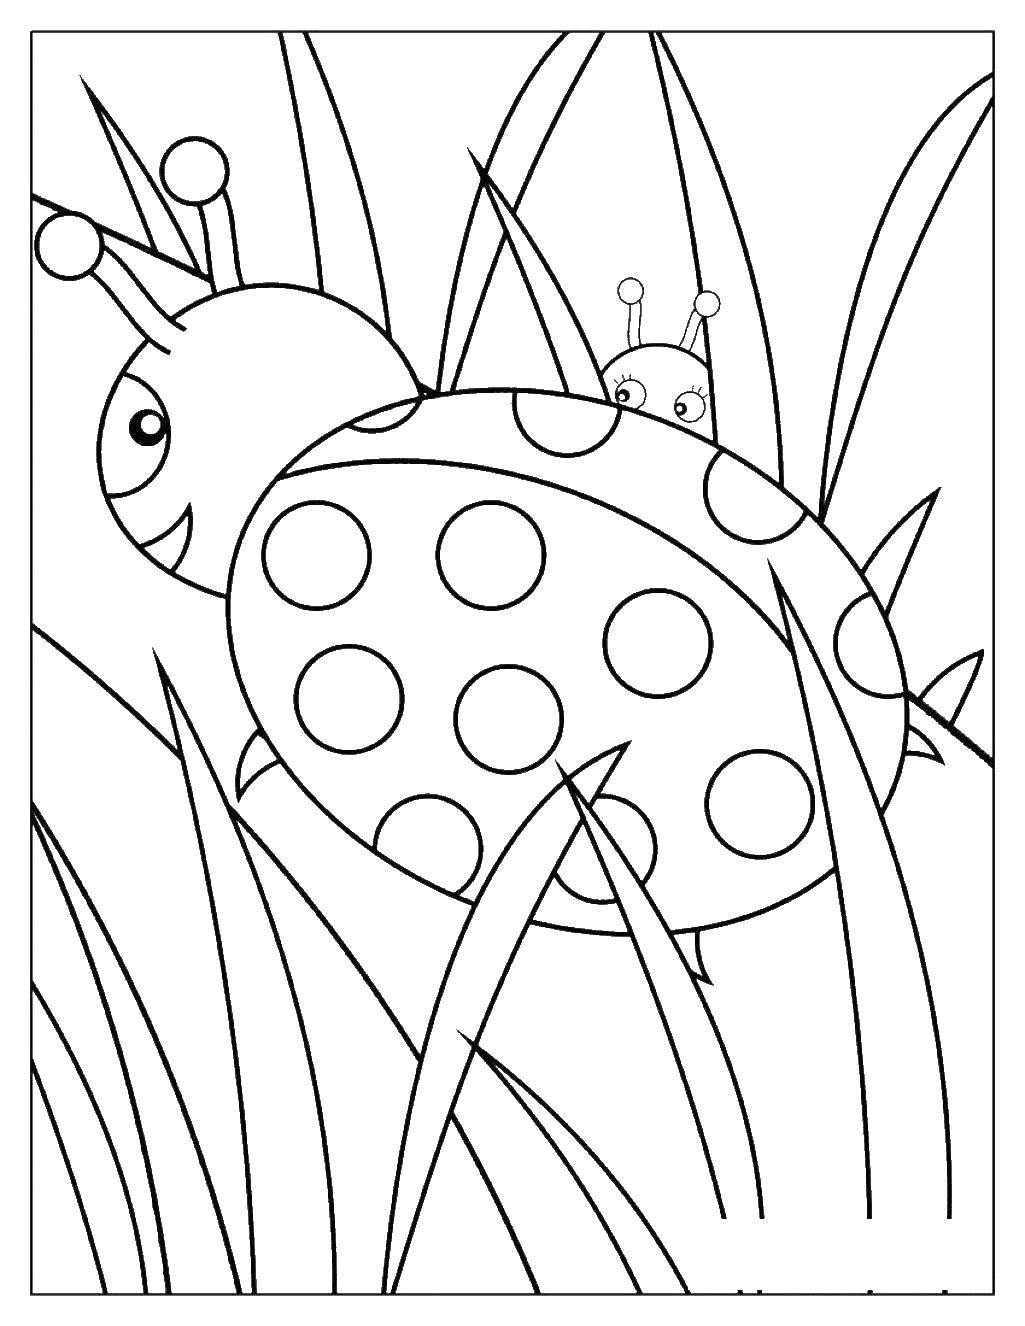 Coloring Ladybugs in the grass. Category Insects. Tags:  Insects, ladybug.